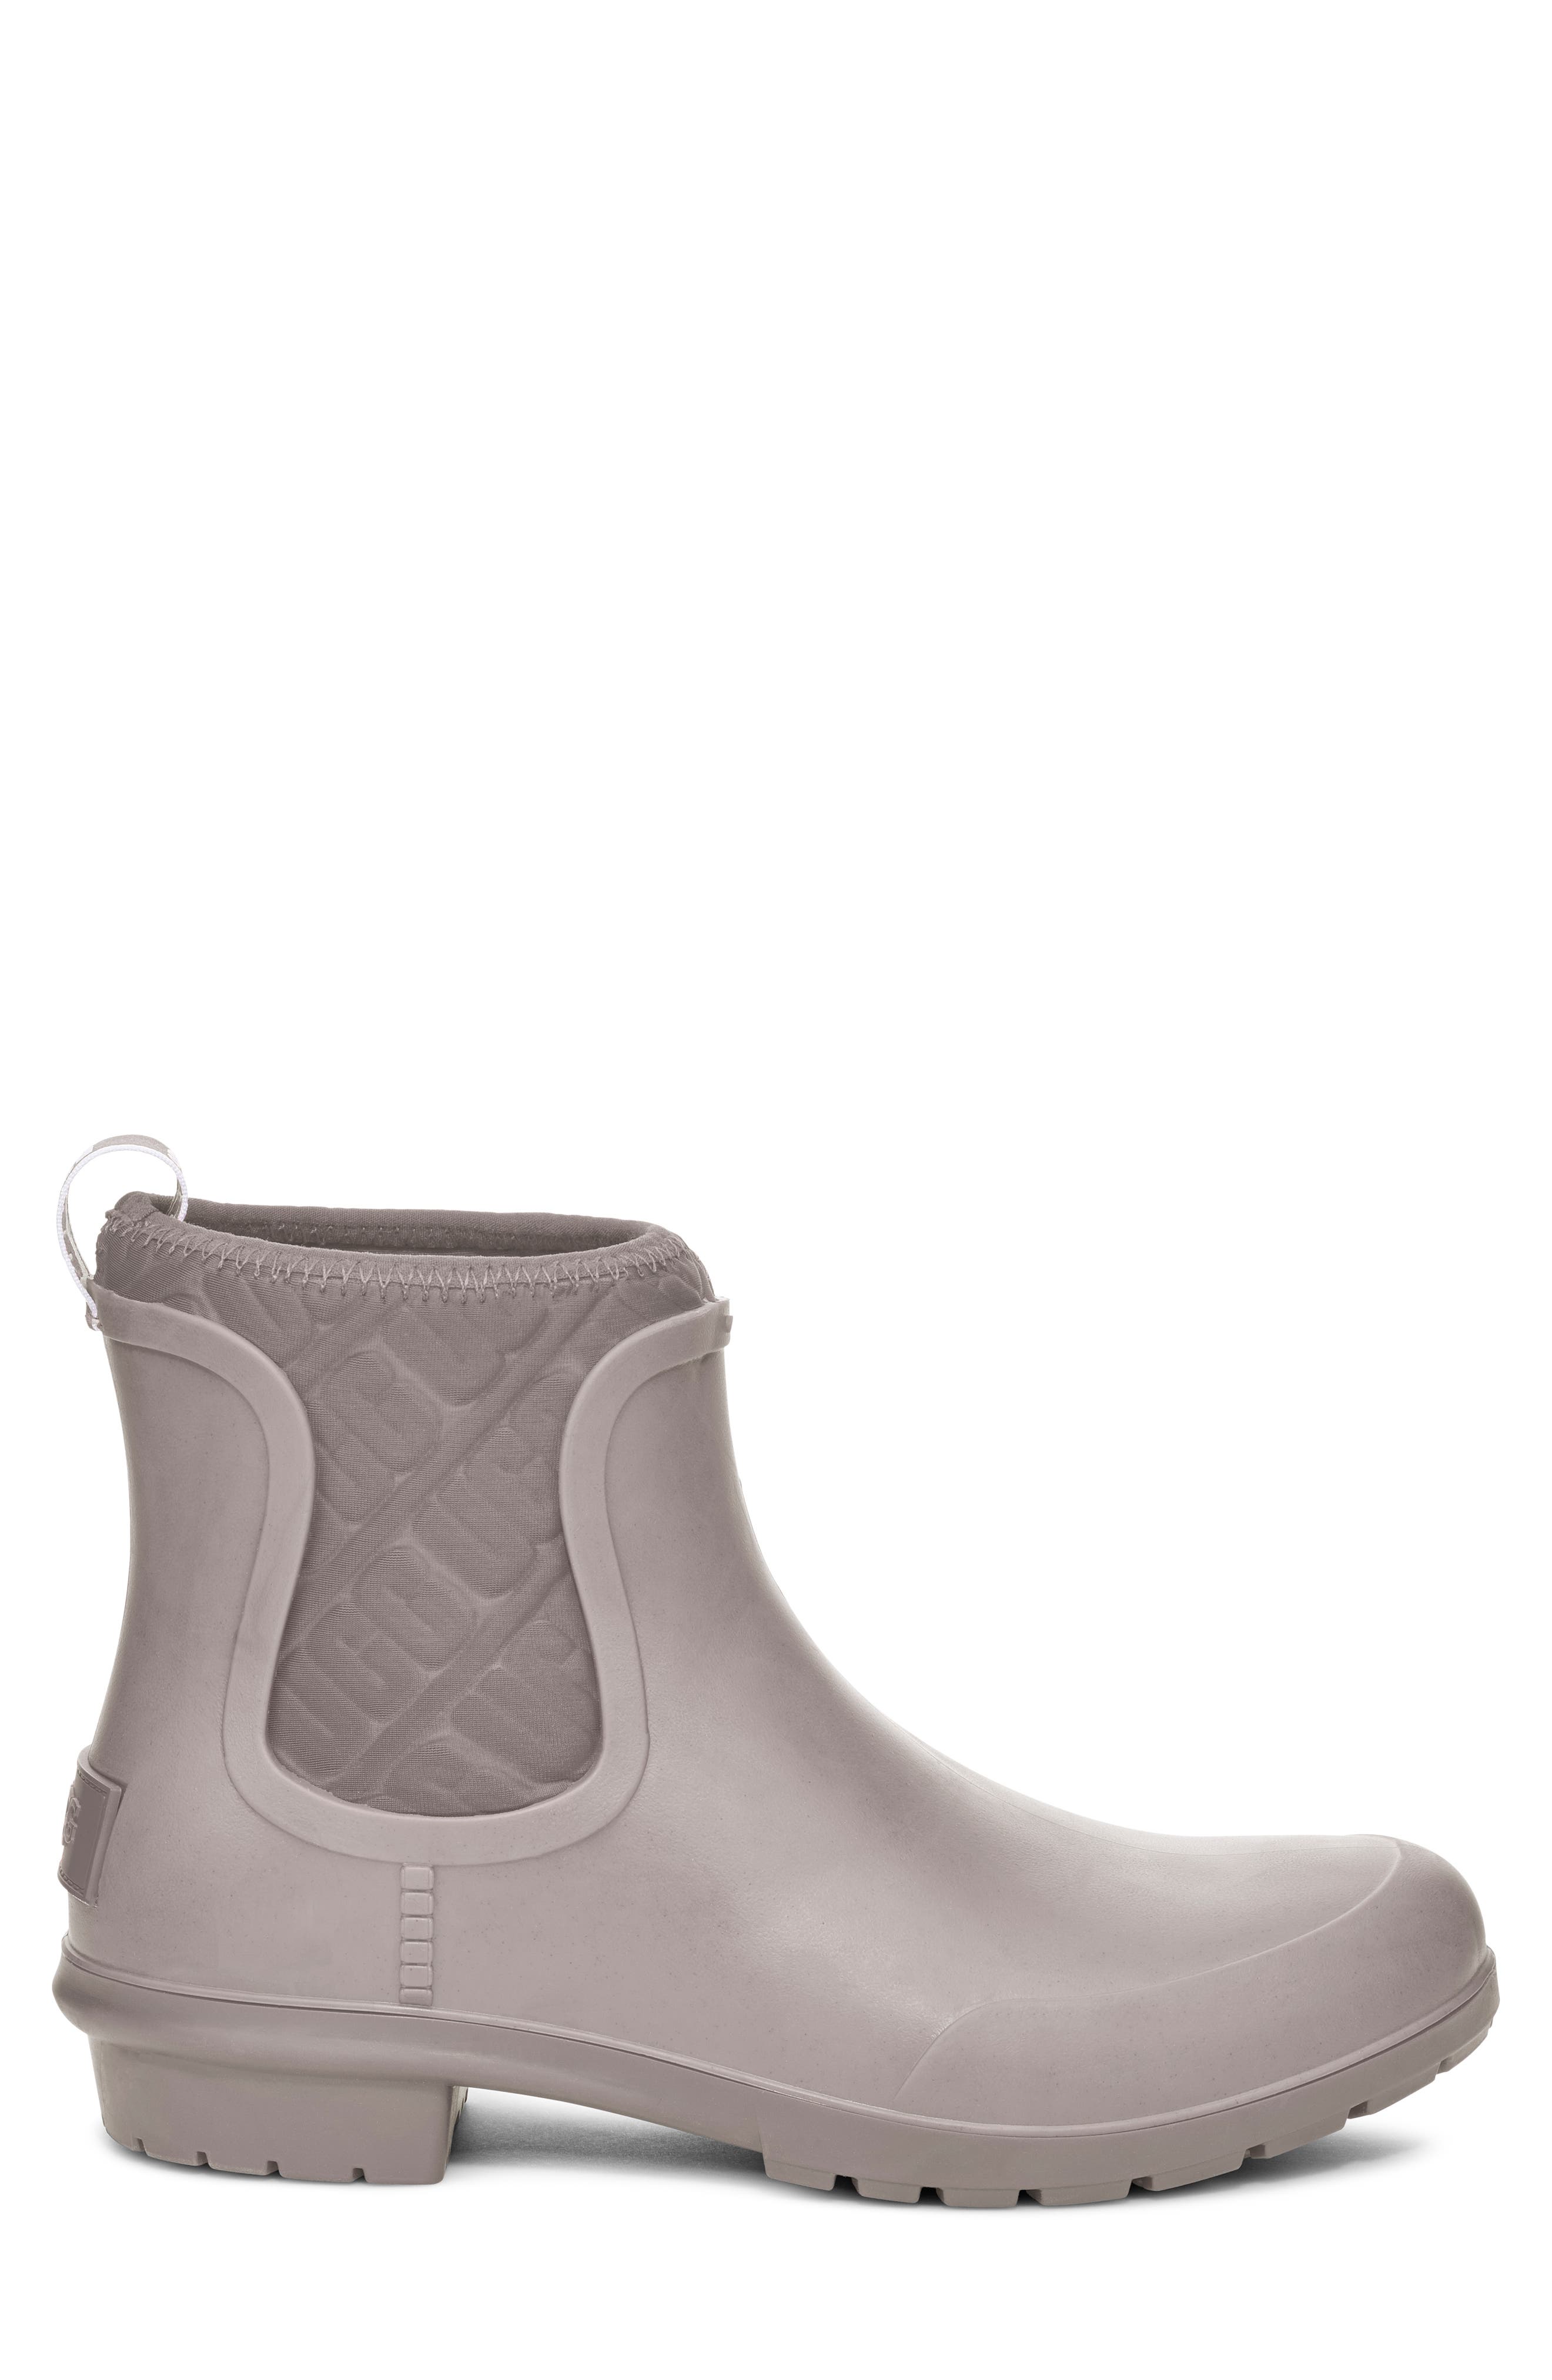 womens ugg boots sale clearance